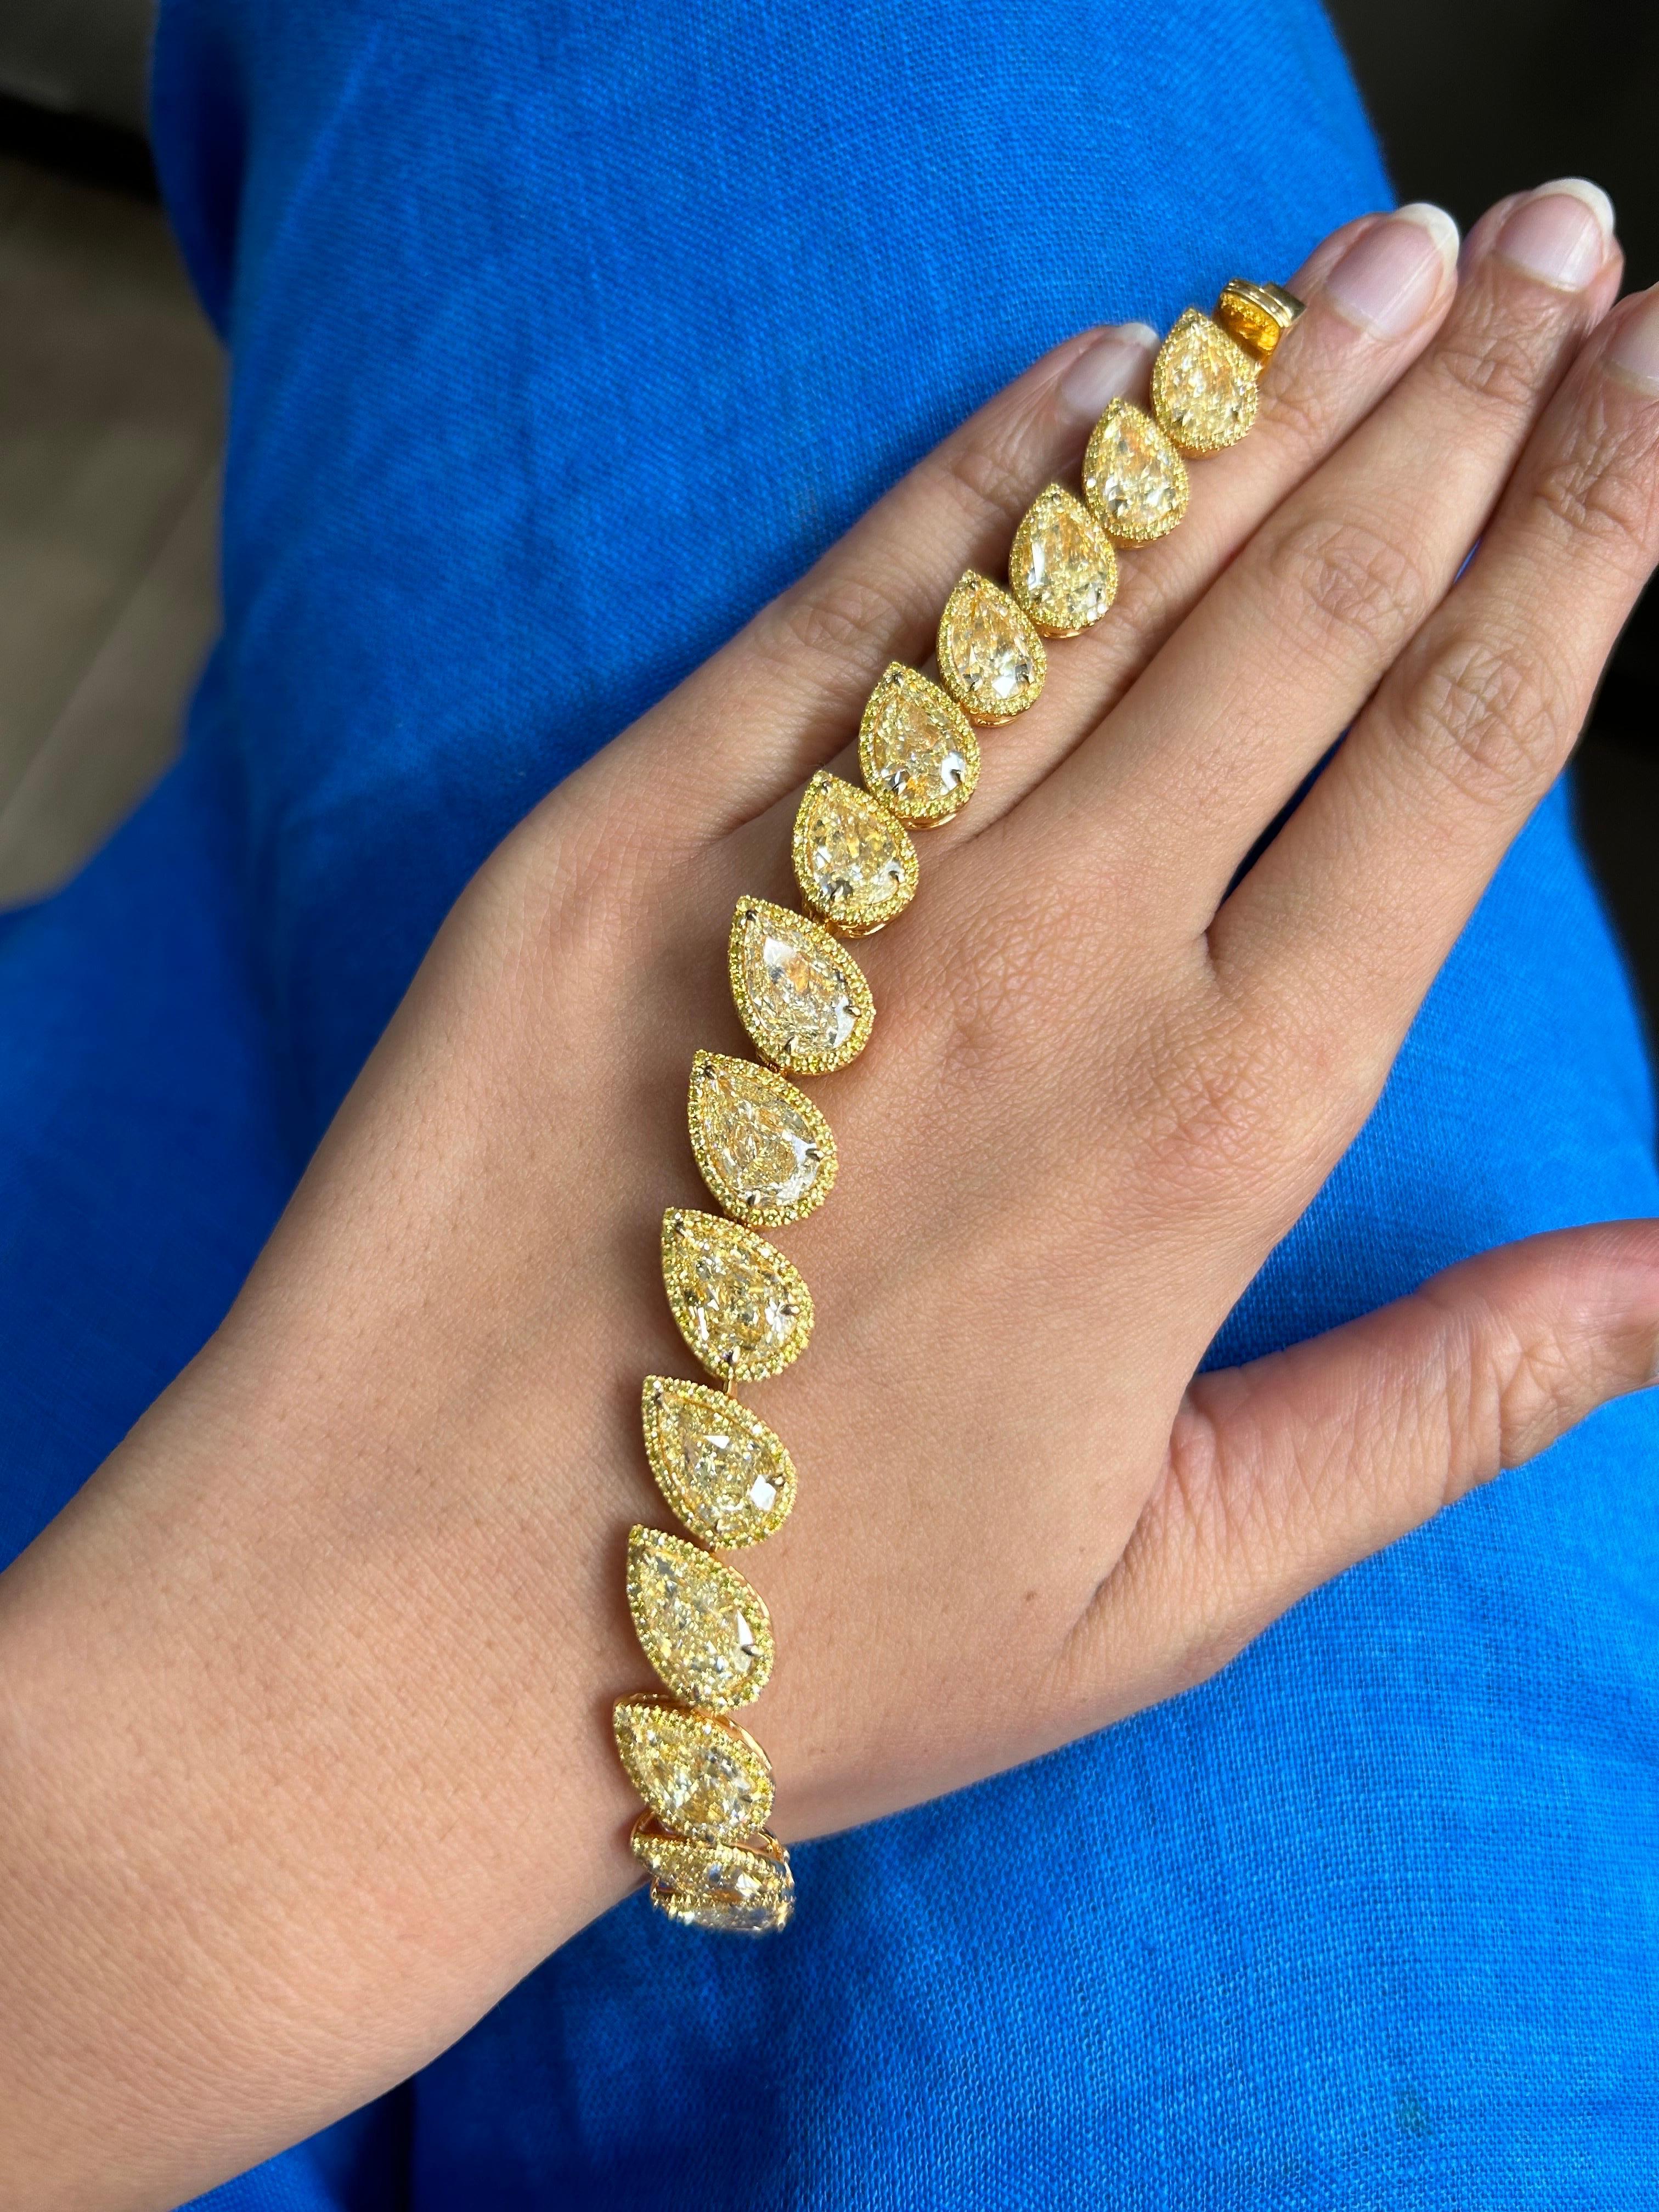 A one of a kind, all GIA certified 31.46 carats pear shape Yellow Diamonds bracelet, with 2.27 carat Yellow Diamonds surrounding them, set in solid 18K Yellow Gold. Current length is 6.5 inches long, can be customized. 
There are total of 15 pear